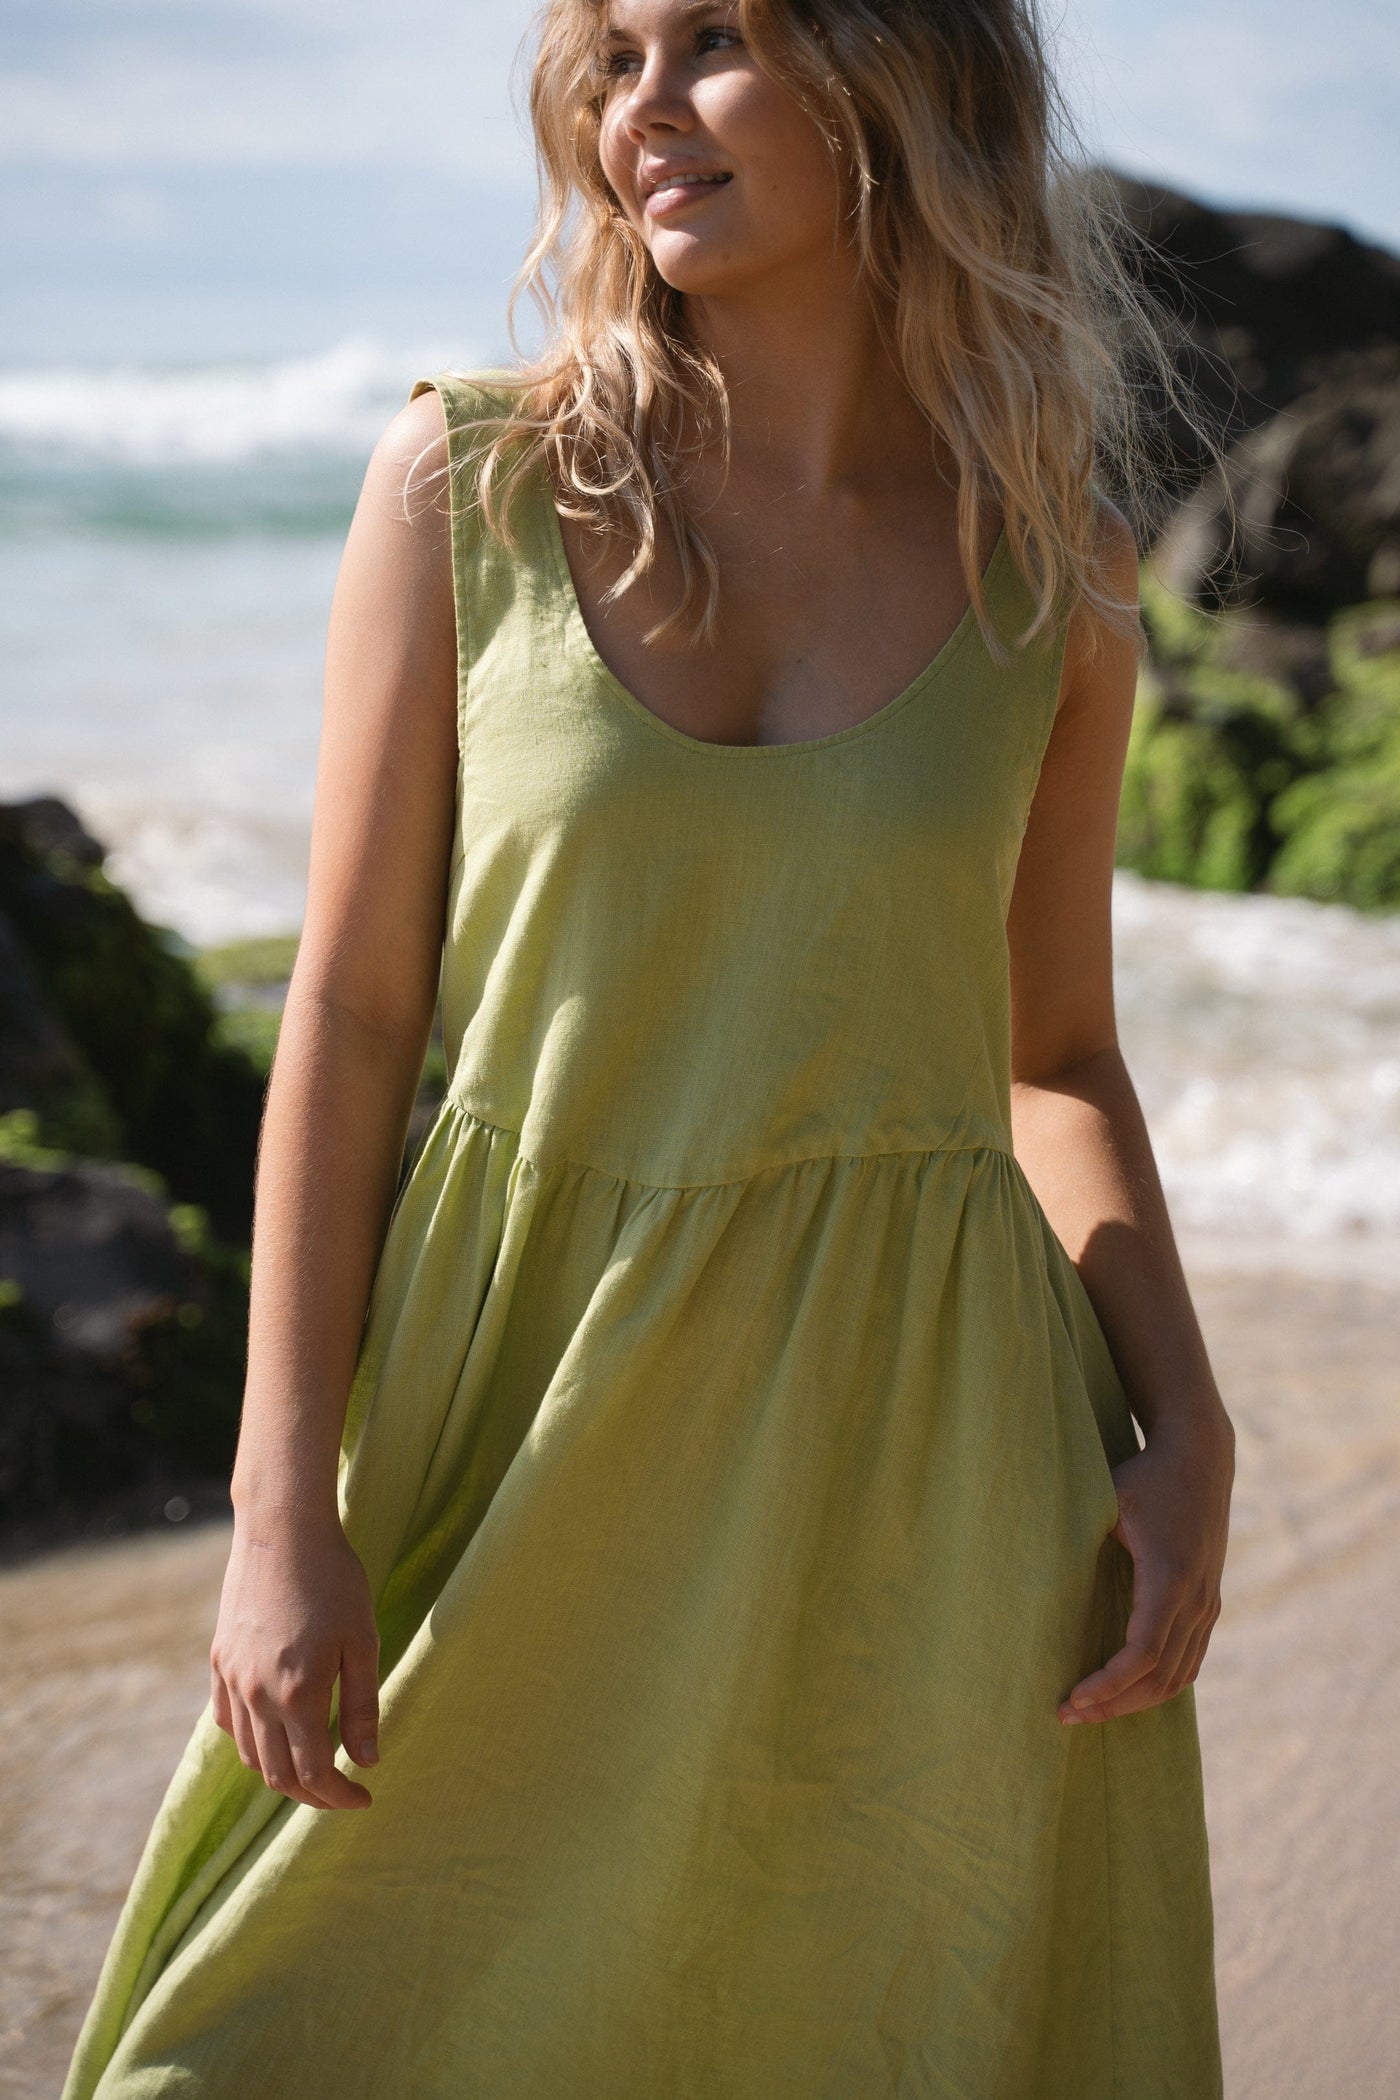 Lilly Pilly Collection Frida dress made from 100% Organic linen in Lemongrass